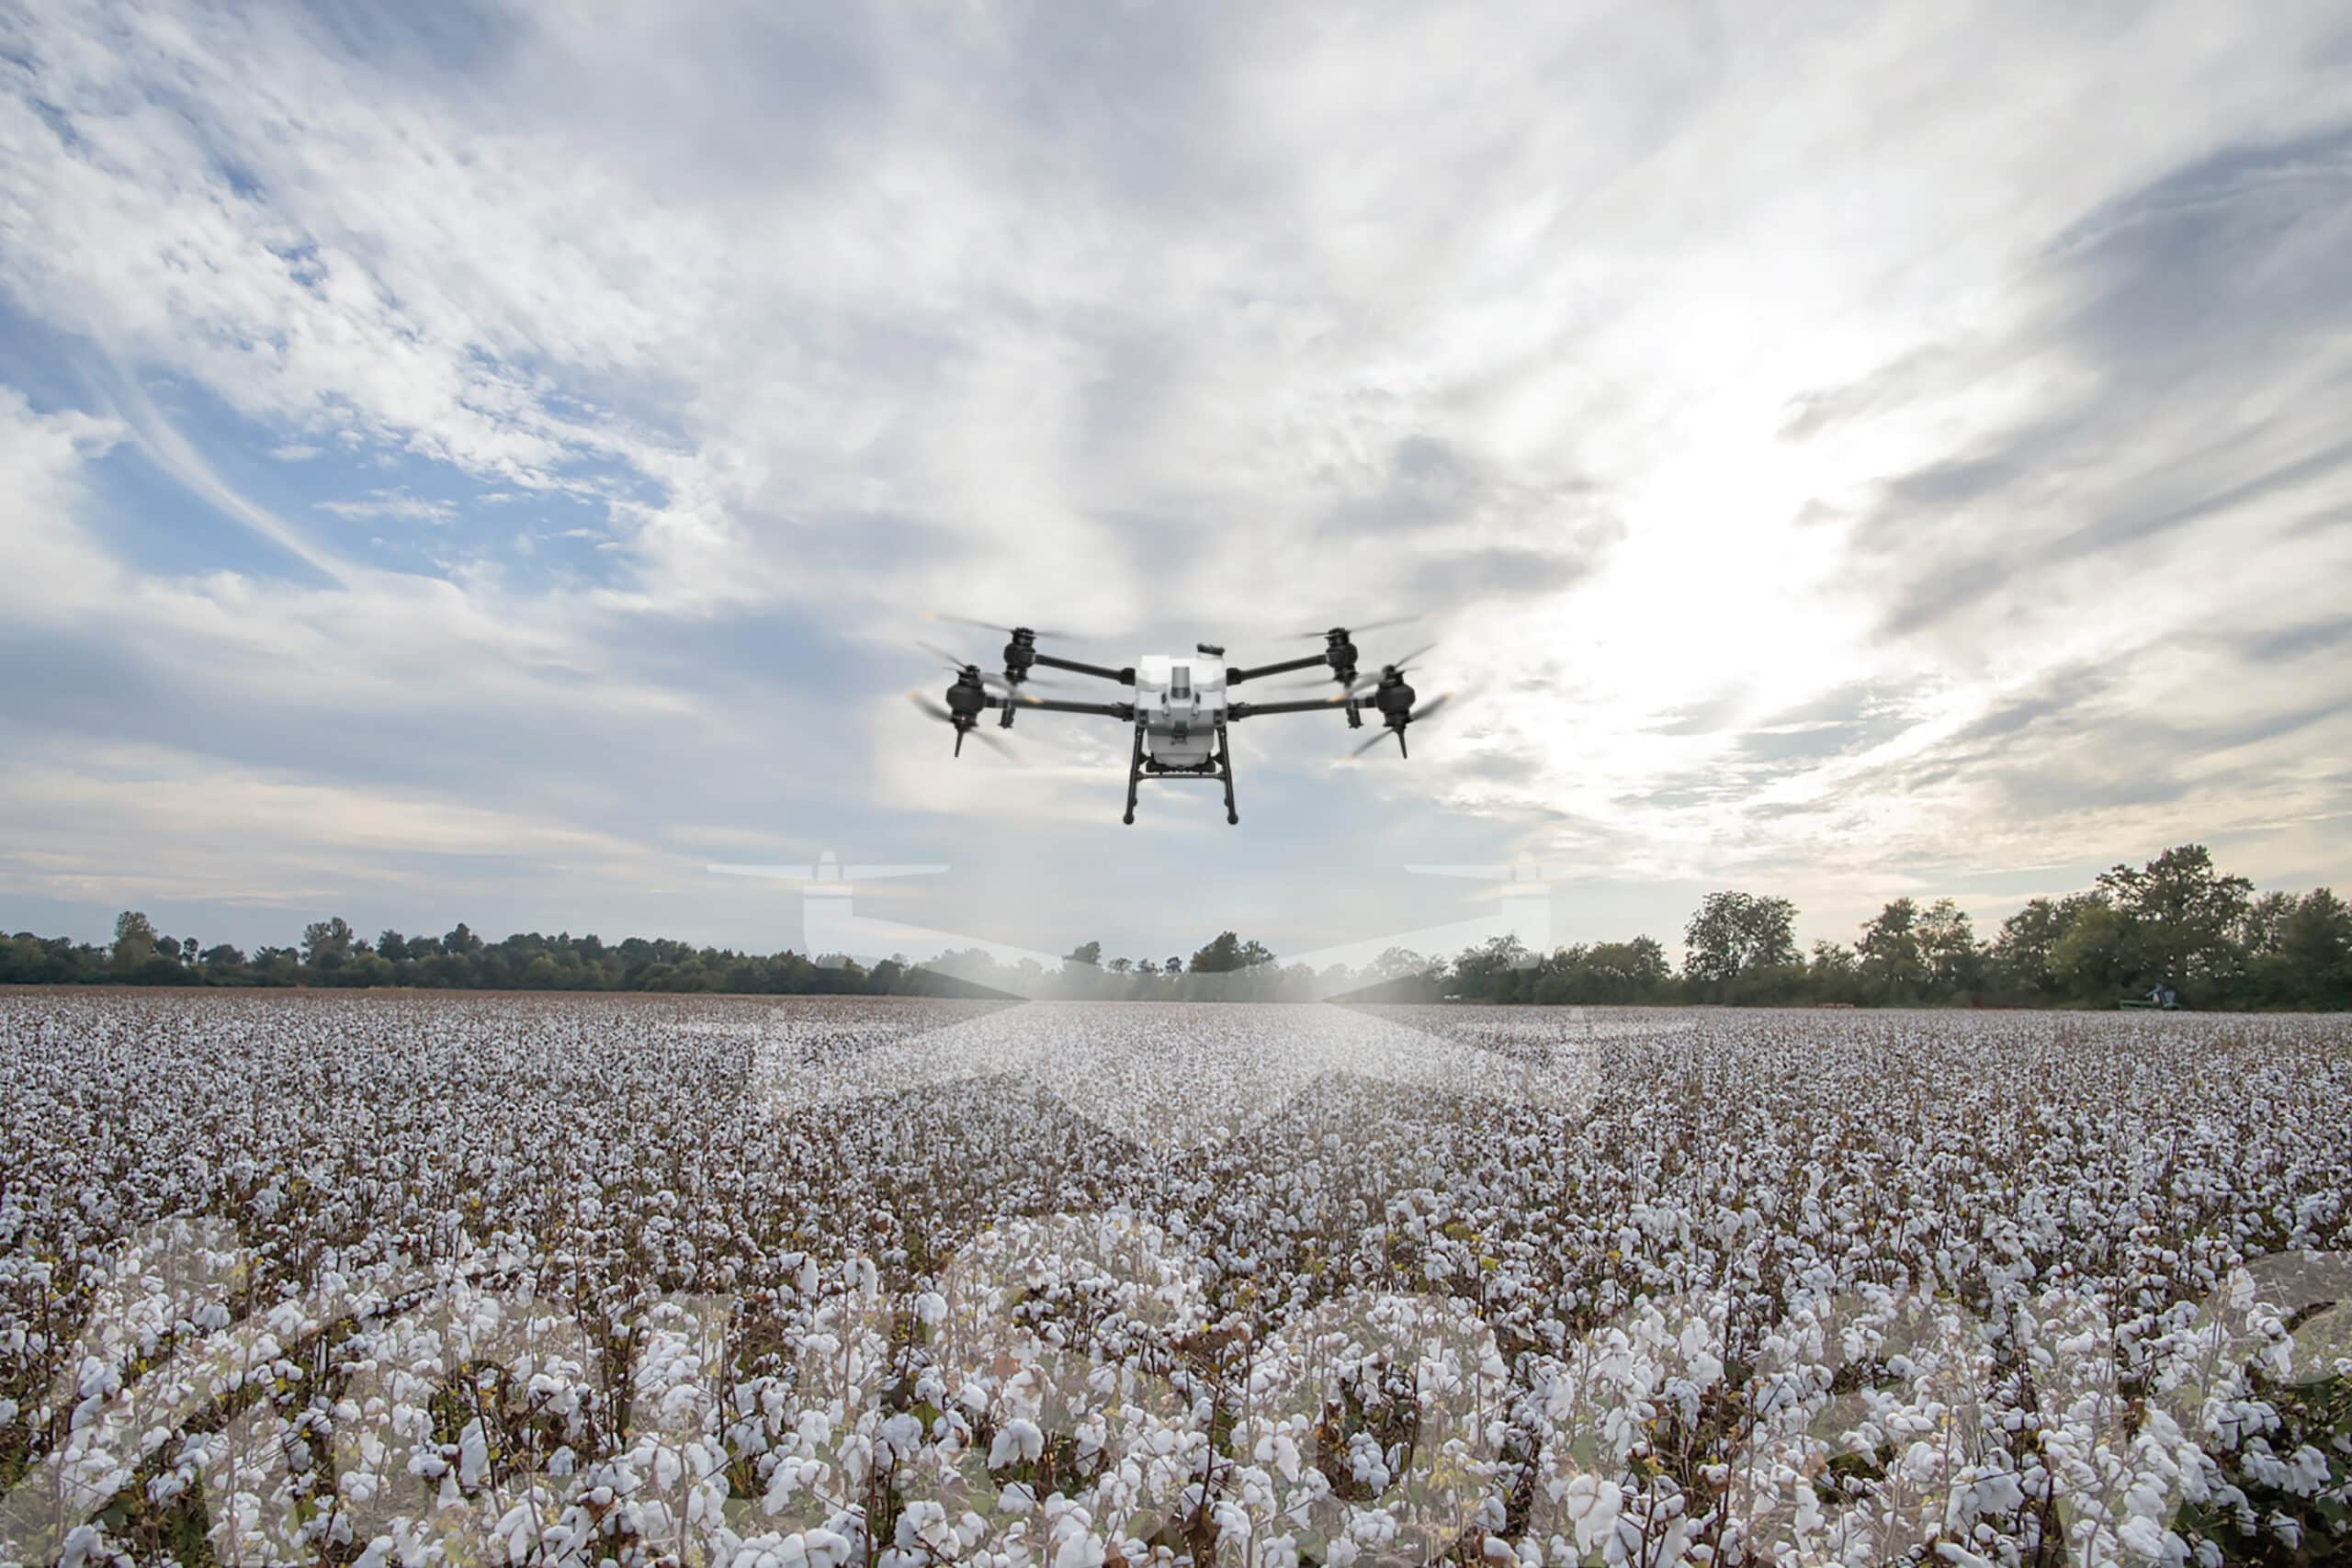 Drone spraying pesticide over a cotton field